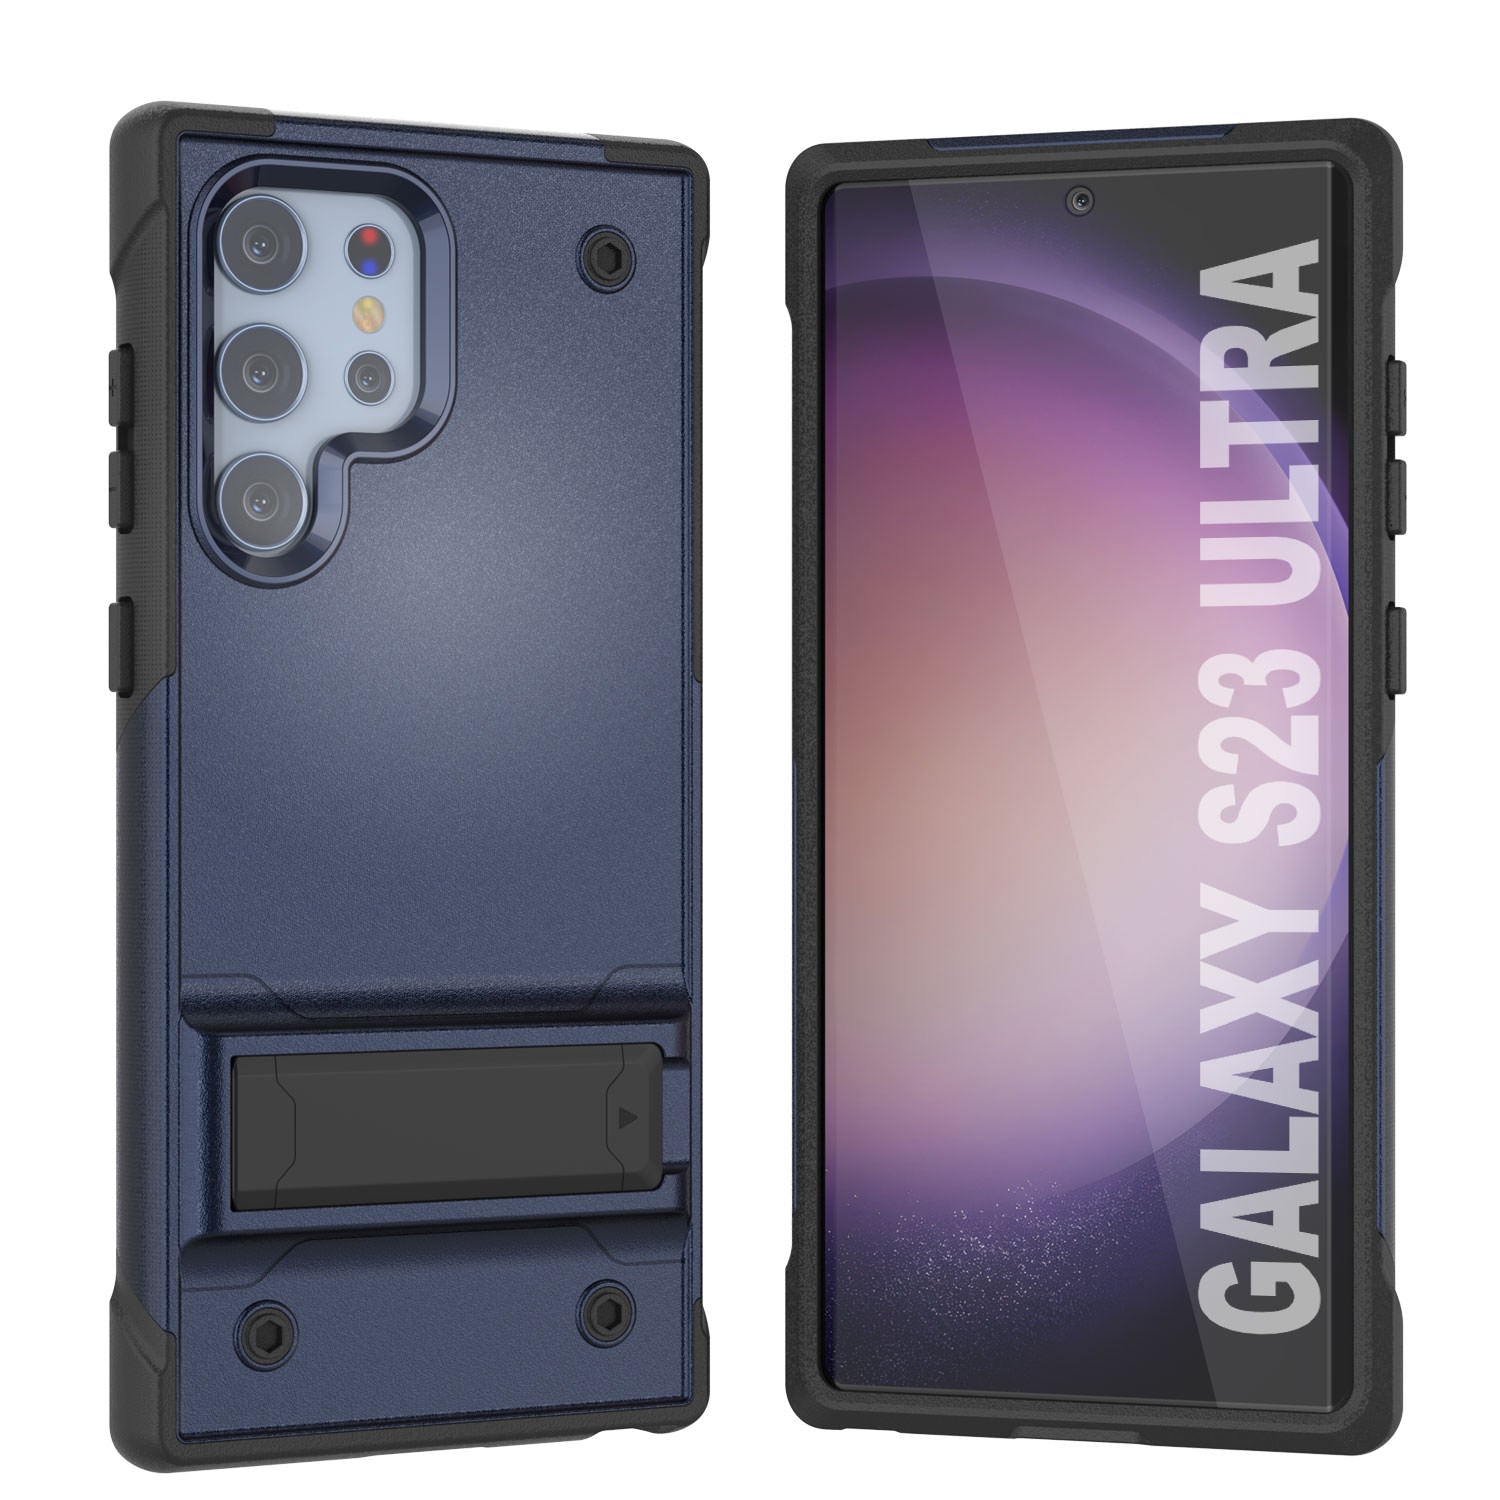 Punkcase Galaxy S23 Ultra Case [Reliance Series] Protective Hybrid Military Grade Cover W/Built-in Kickstand [Navy-Black]